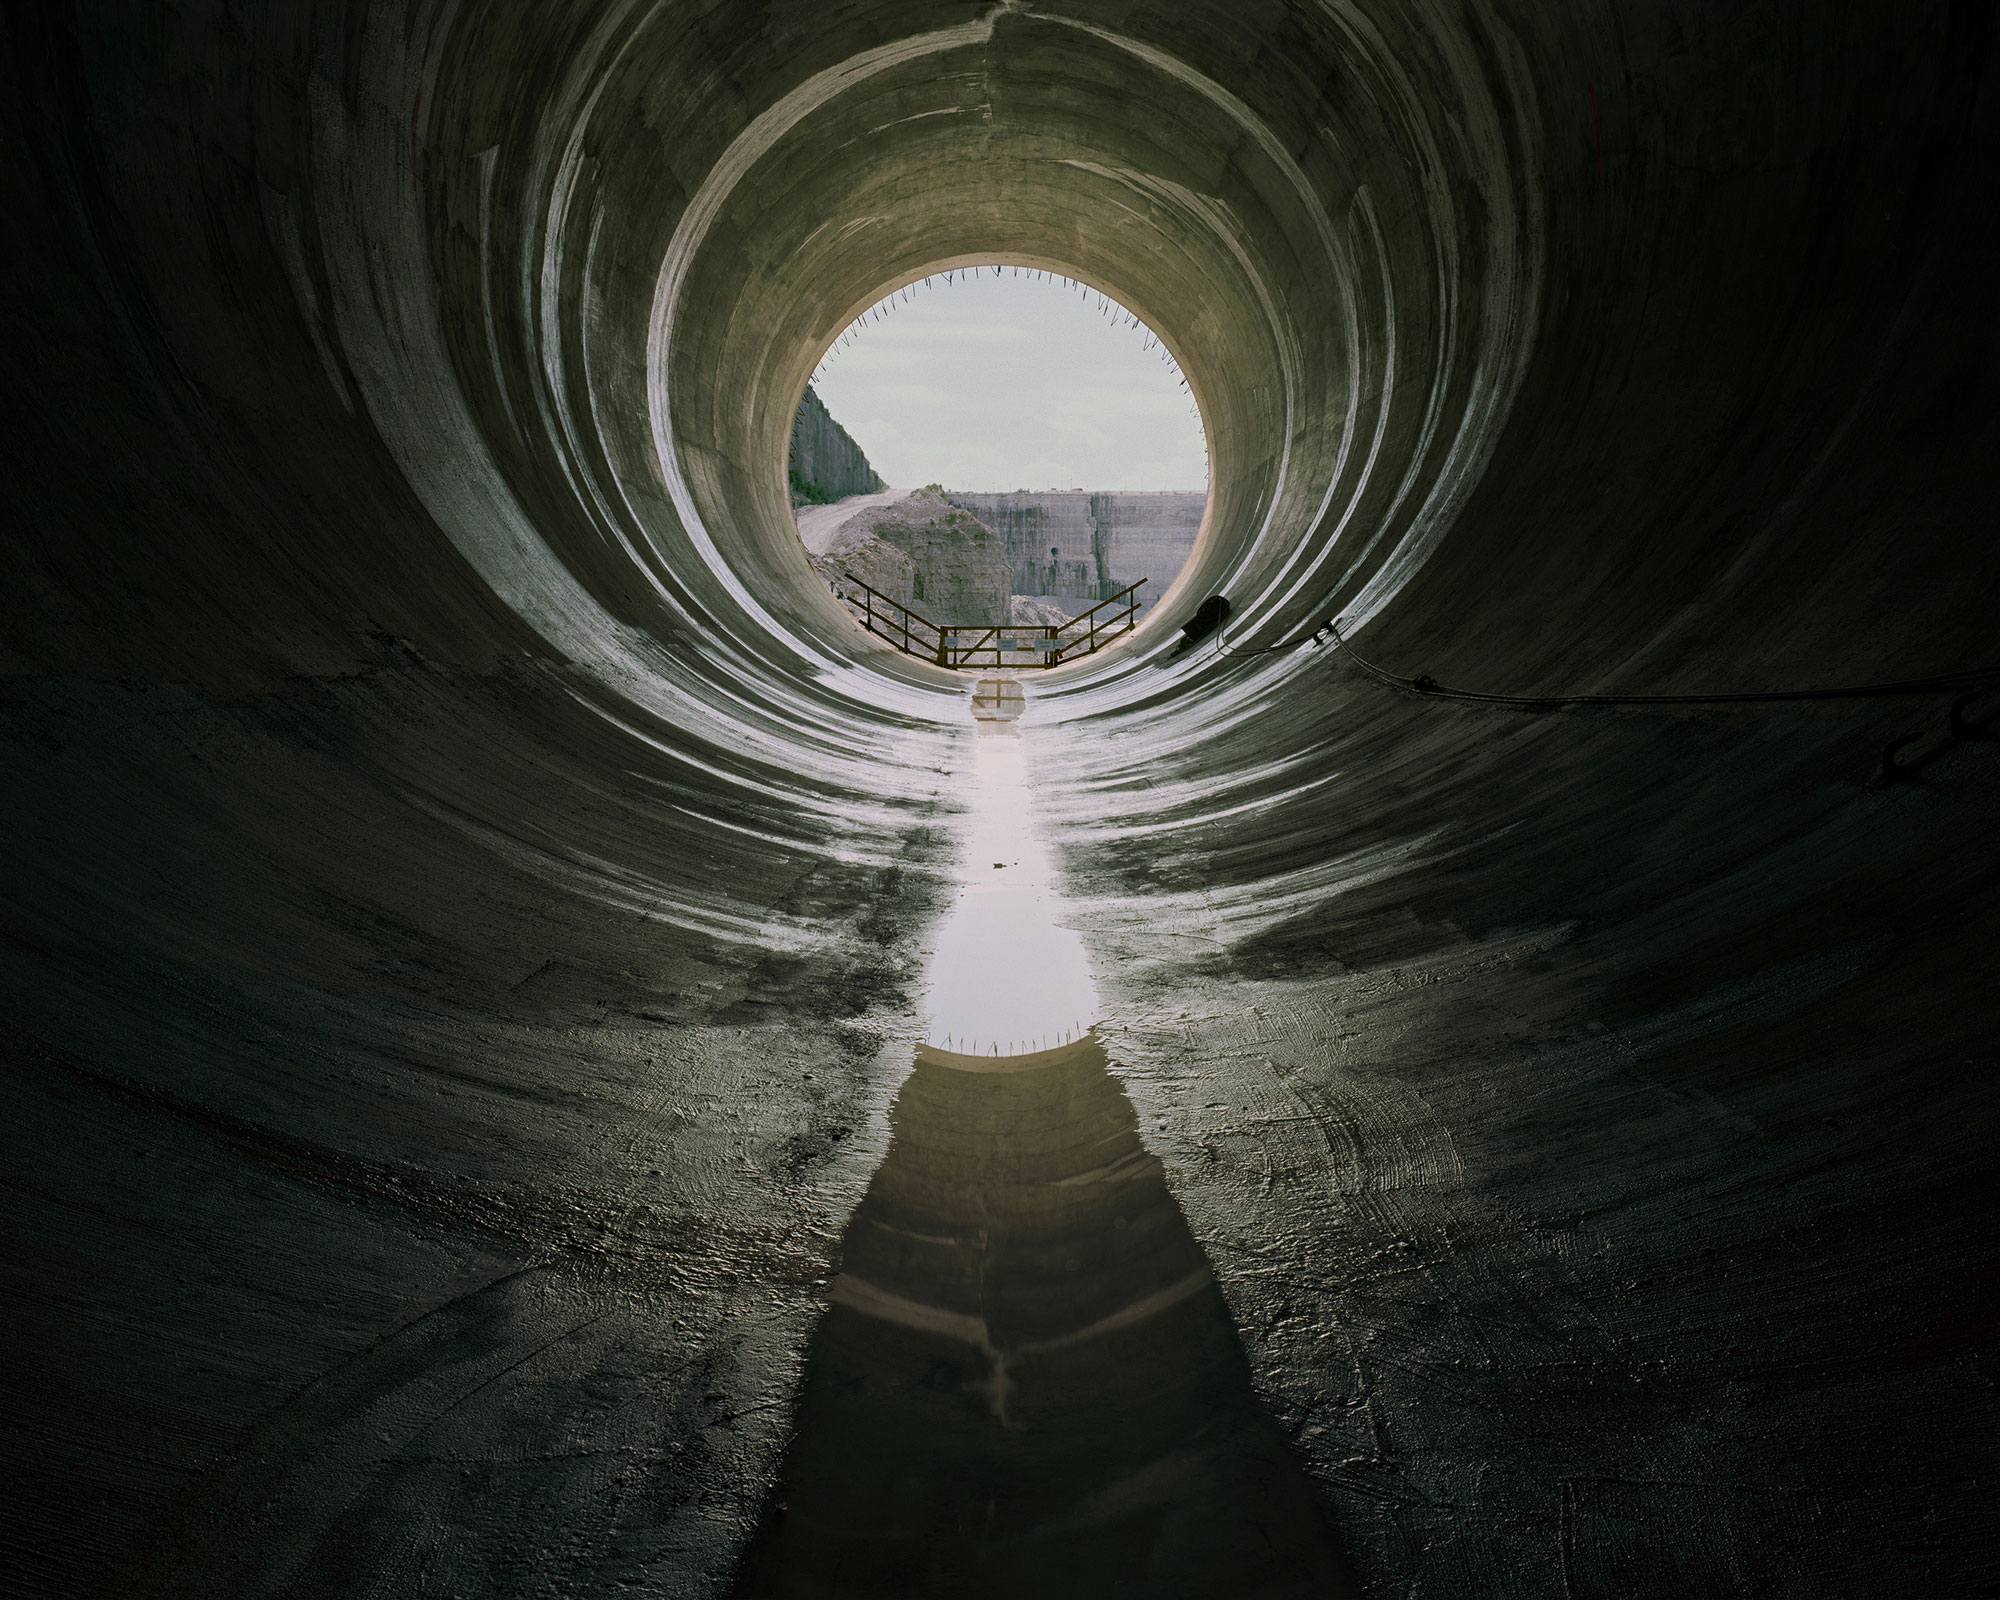 View from inside a large tunnel, looking out its circular opening in the distance. A shallow puddle runs the length of the tunnel.